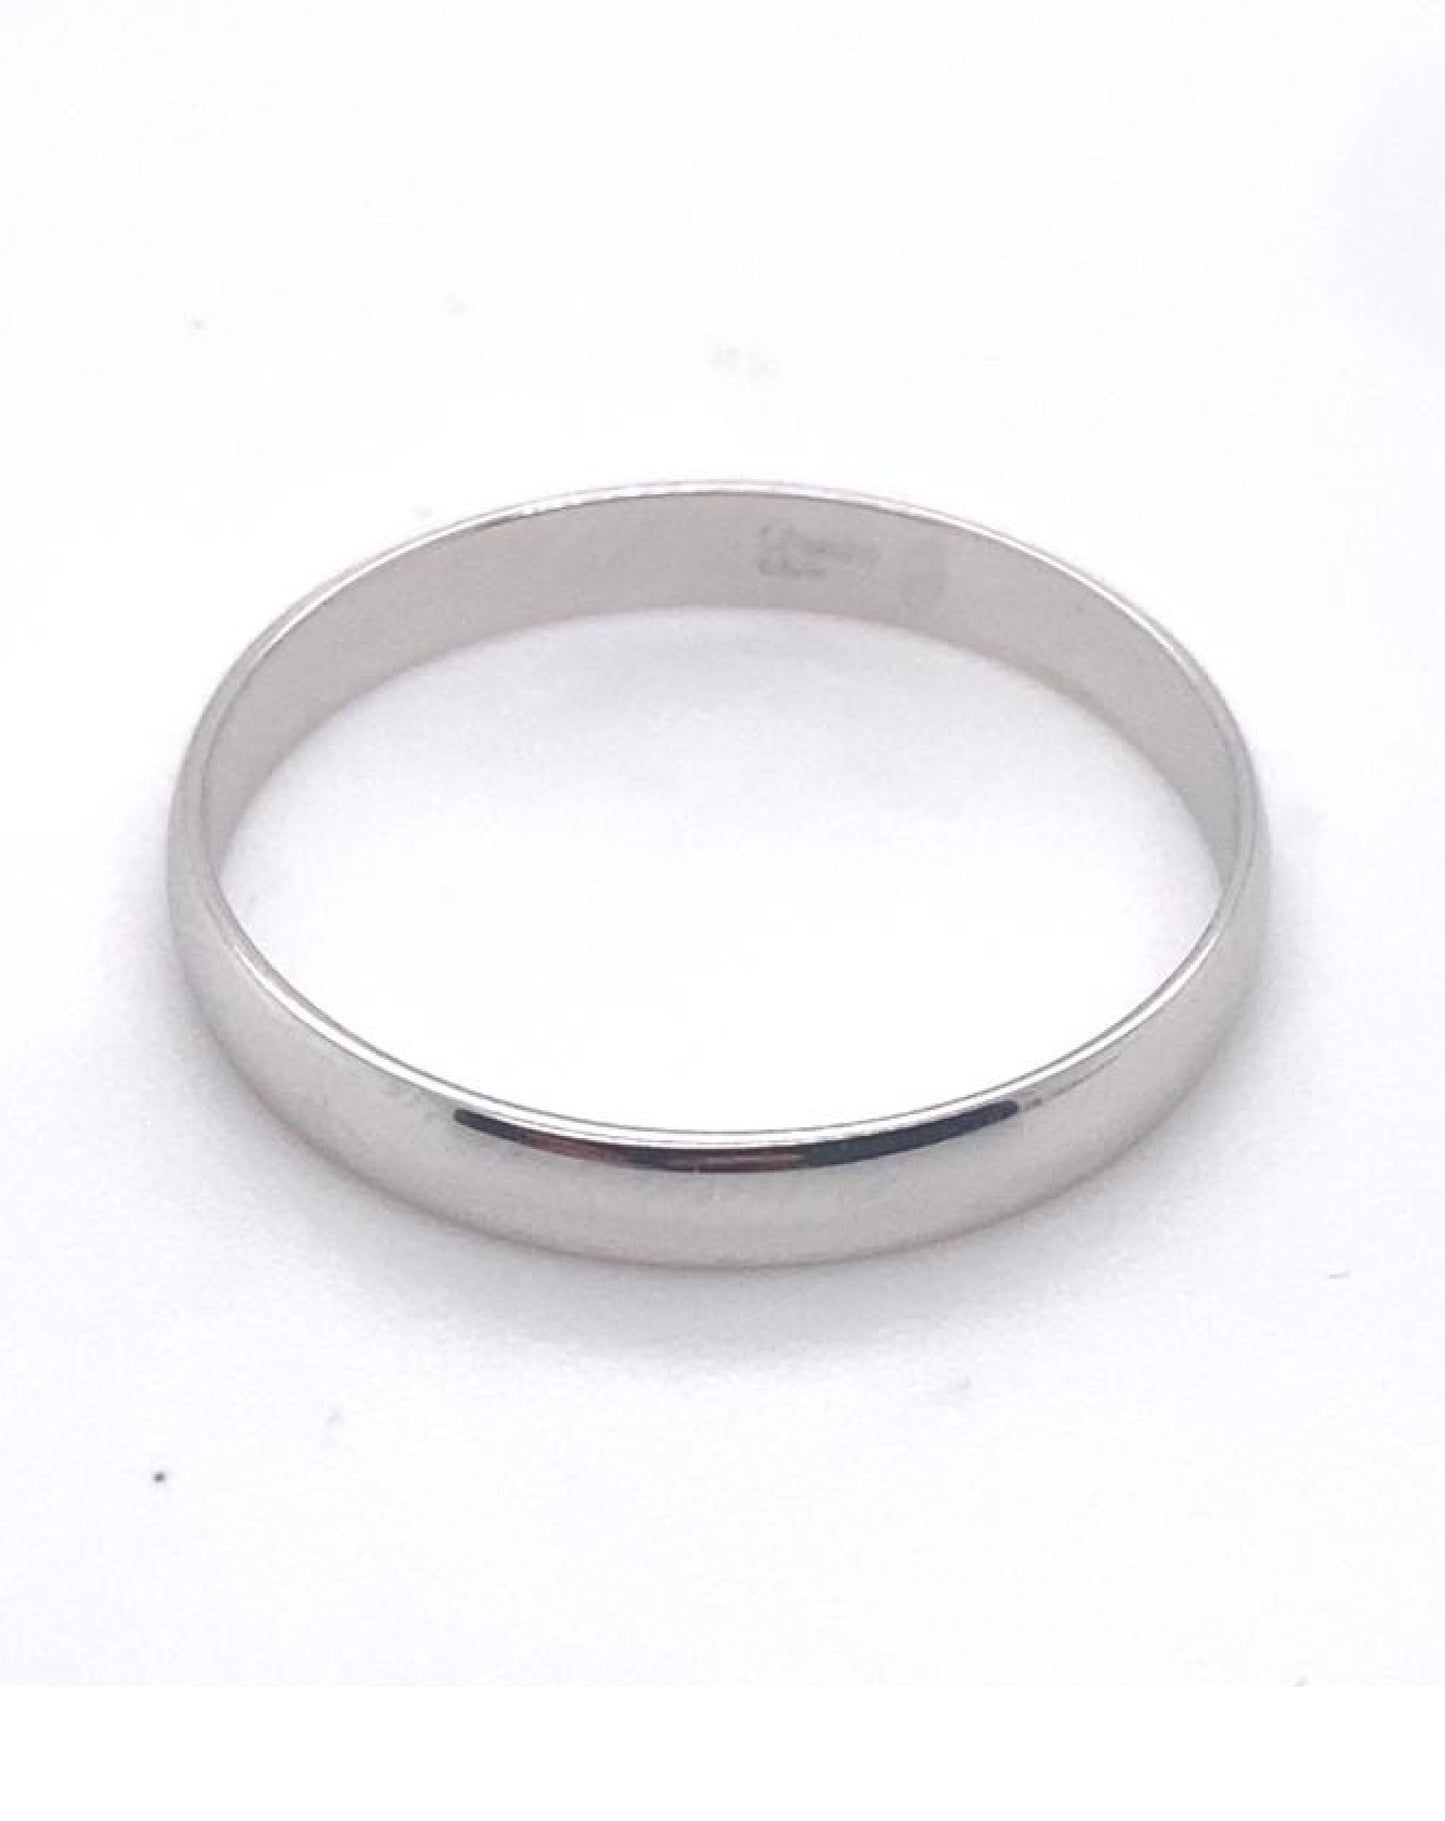 Gold 18 kt White Gold Band Ring 750mls Jewelry